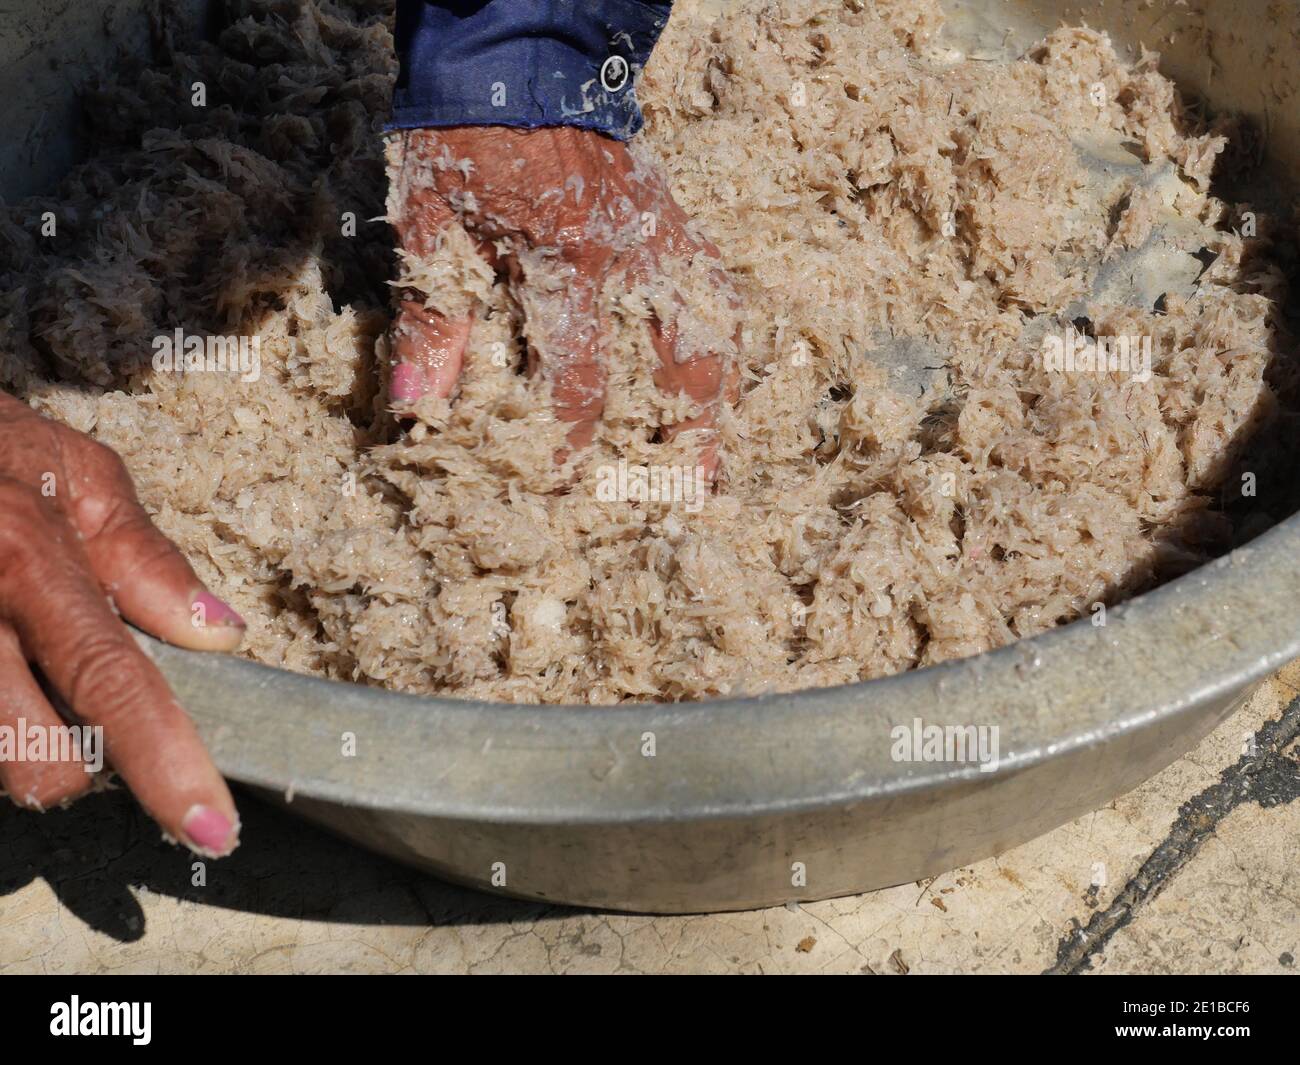 Fisherman mauling group of fresh Krill or Opossum with salt, Plankton that fishermen trap for cooking, Preserving food with salty and sun drying Stock Photo